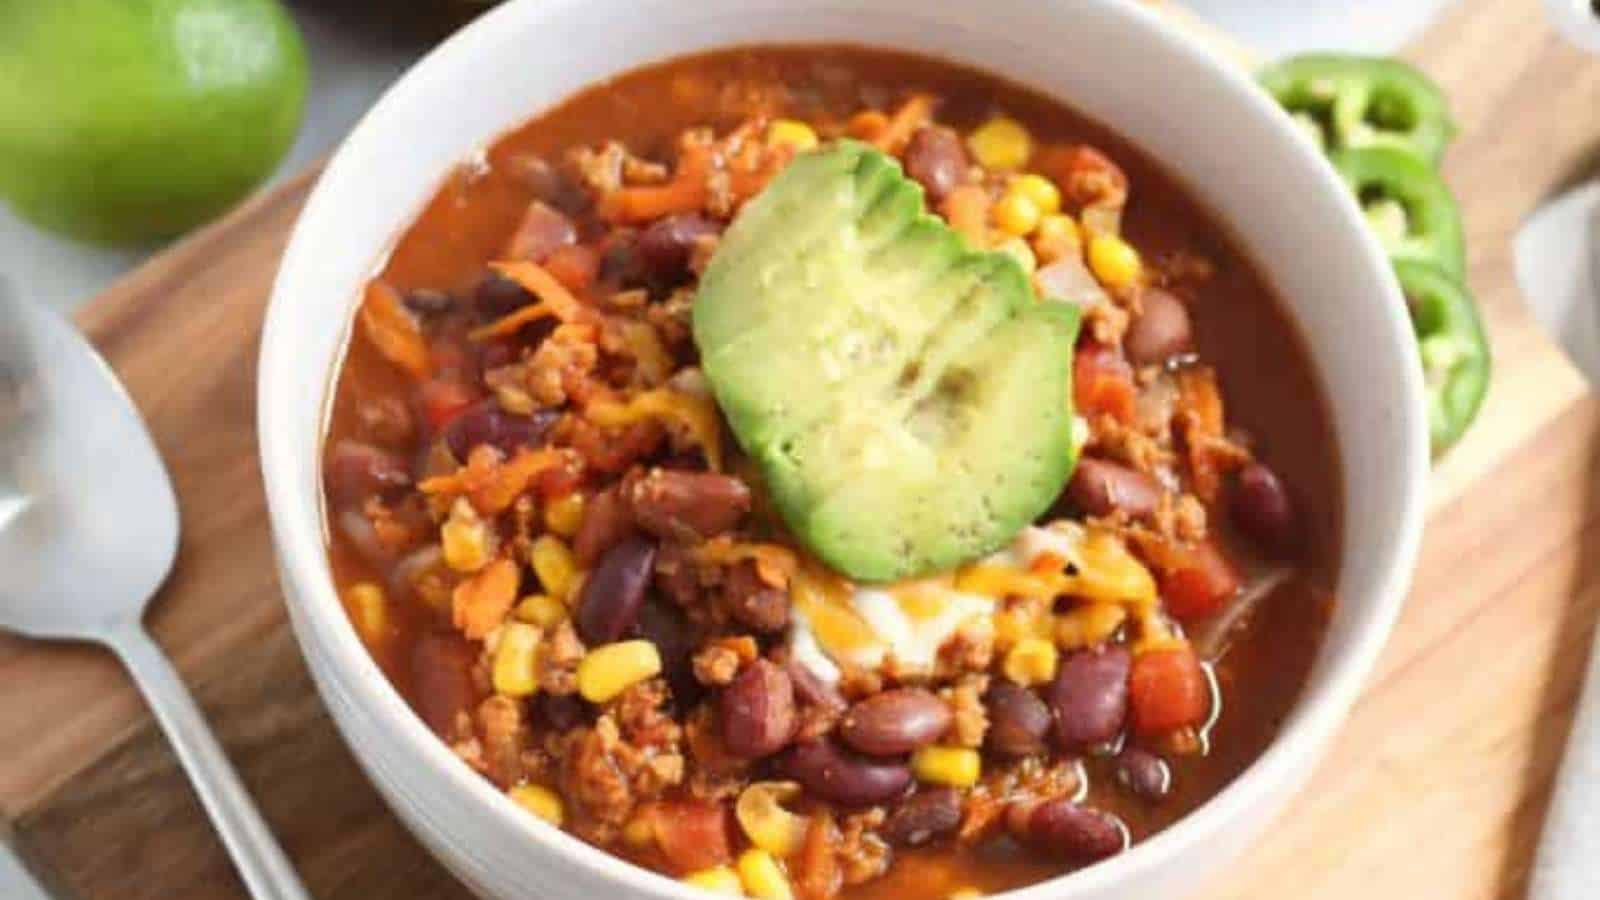 A bowl of chili with corn and avocado on a wooden cutting board.